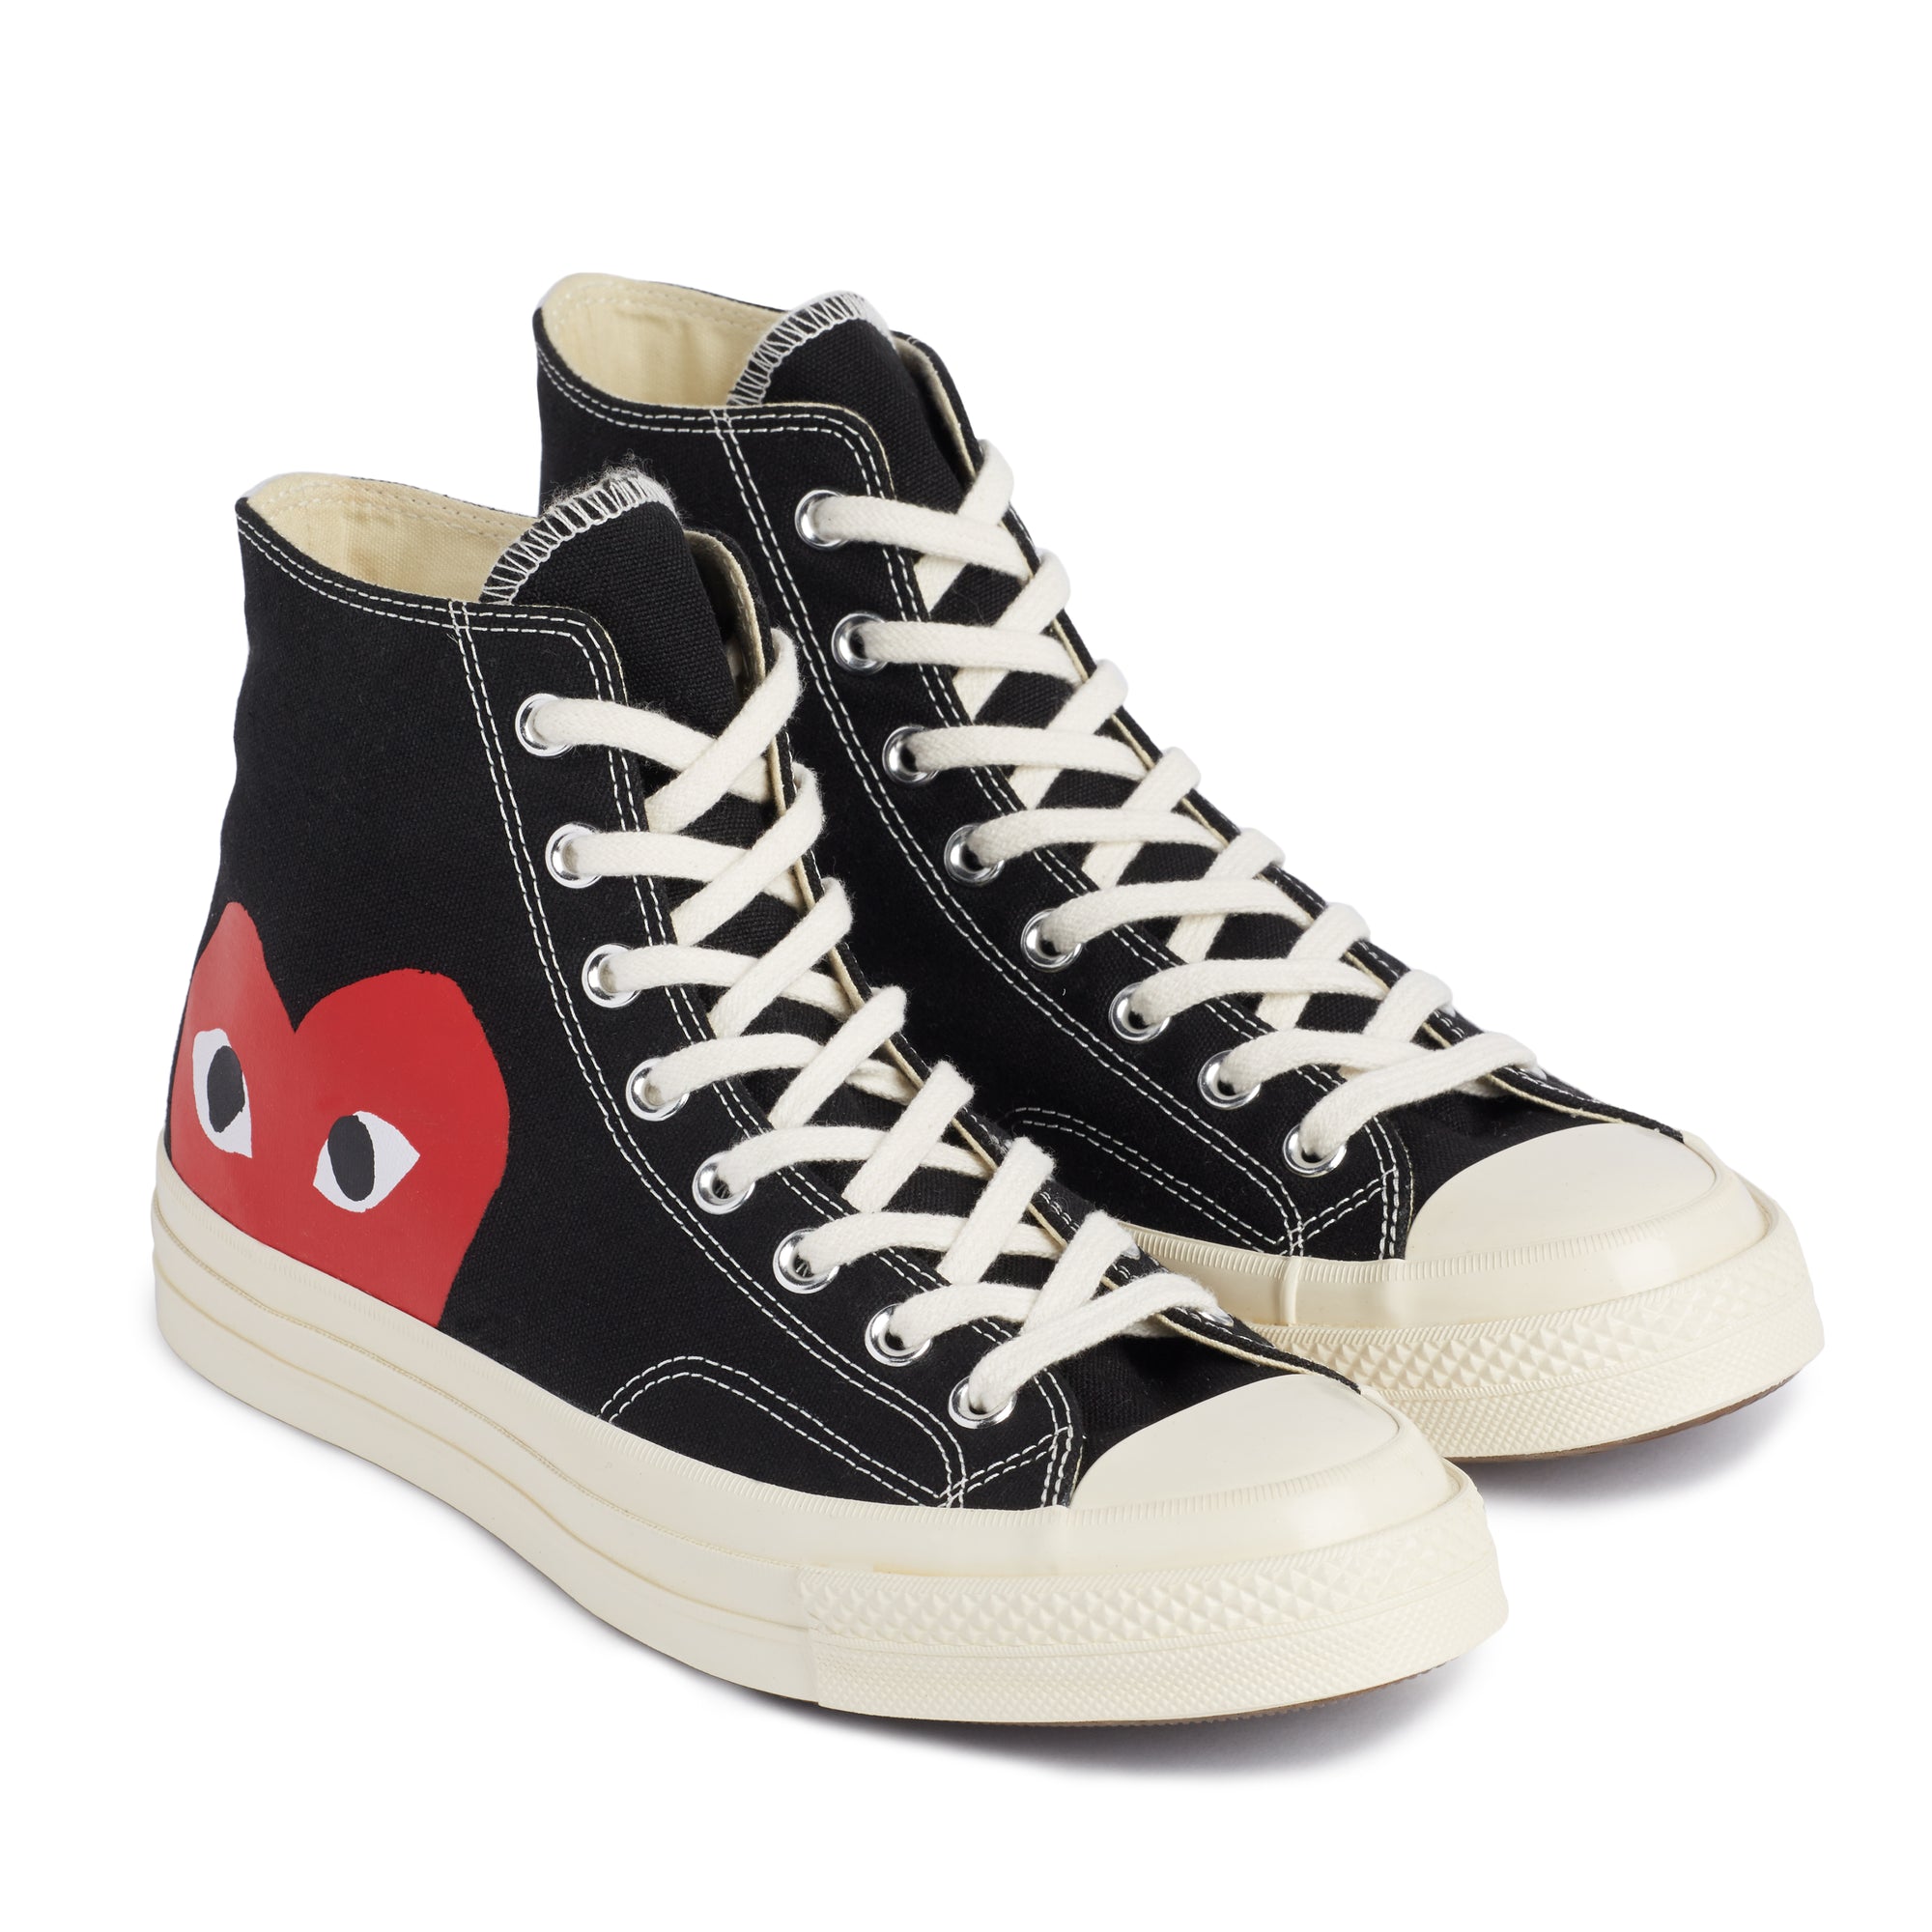 Play Converse - Red Heart Chuck Taylor All Star ’70 High Sneakers - (Black) view 2